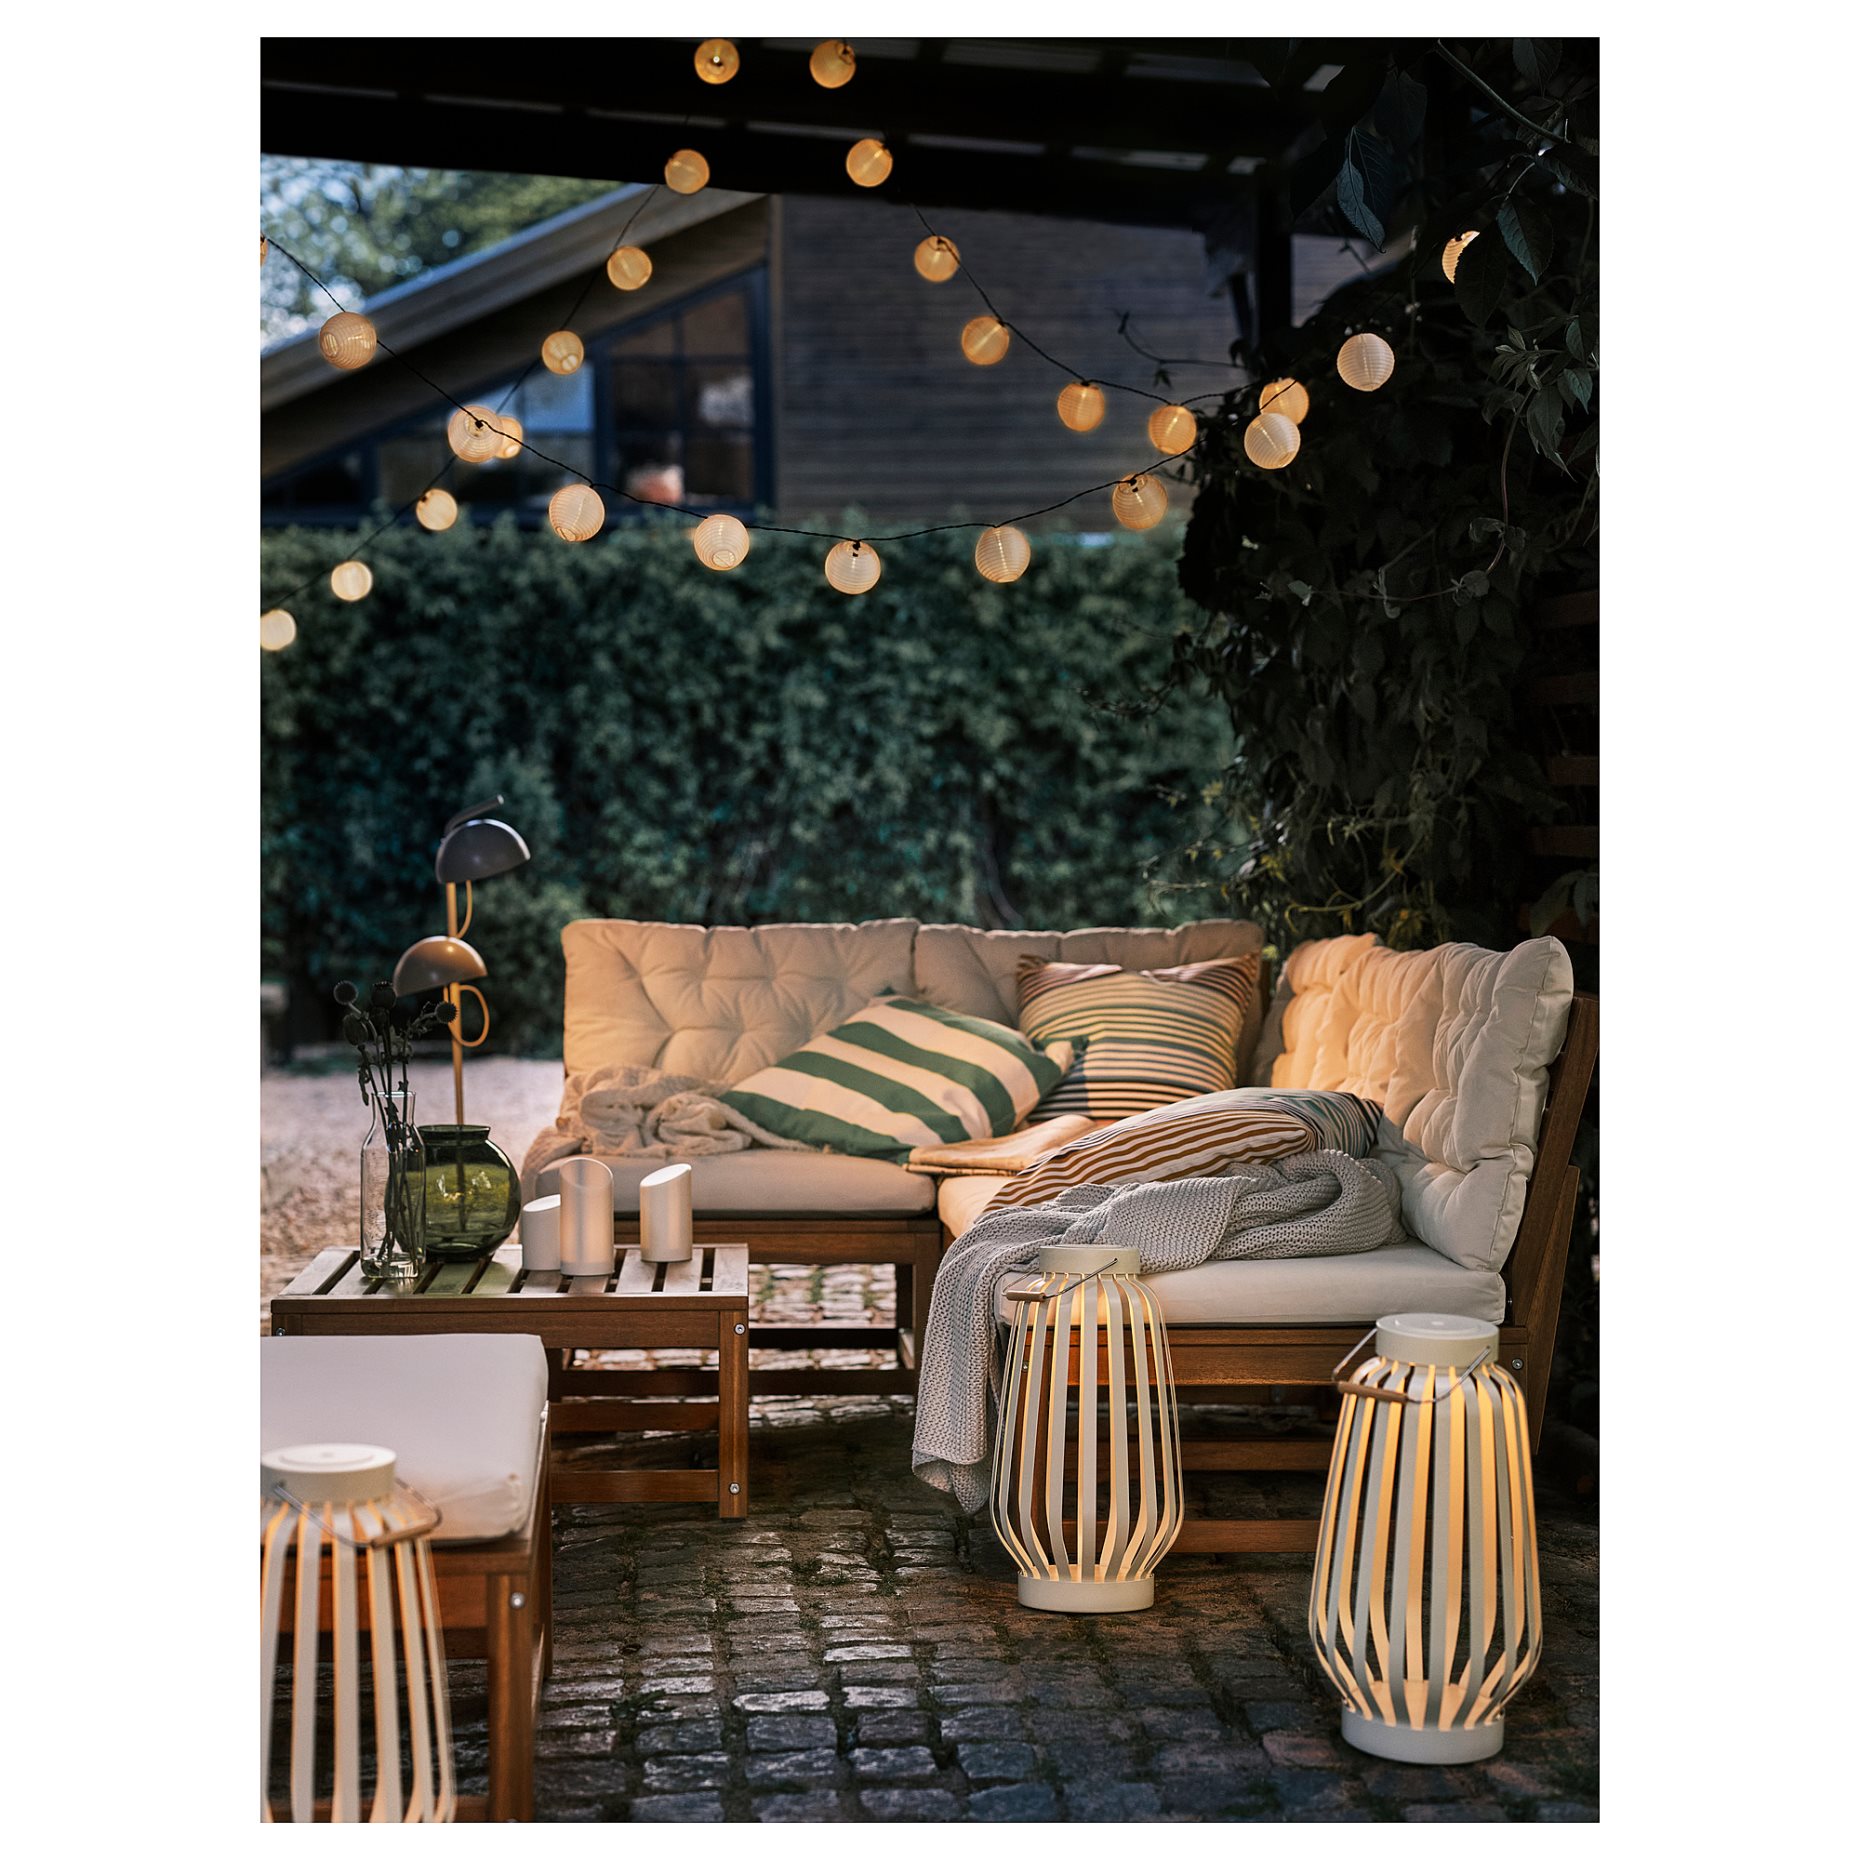 SOMMARLÅNKE, floor lamp with built-in LED light source/outdoor/battery-operated, 42 cm, 405.439.86